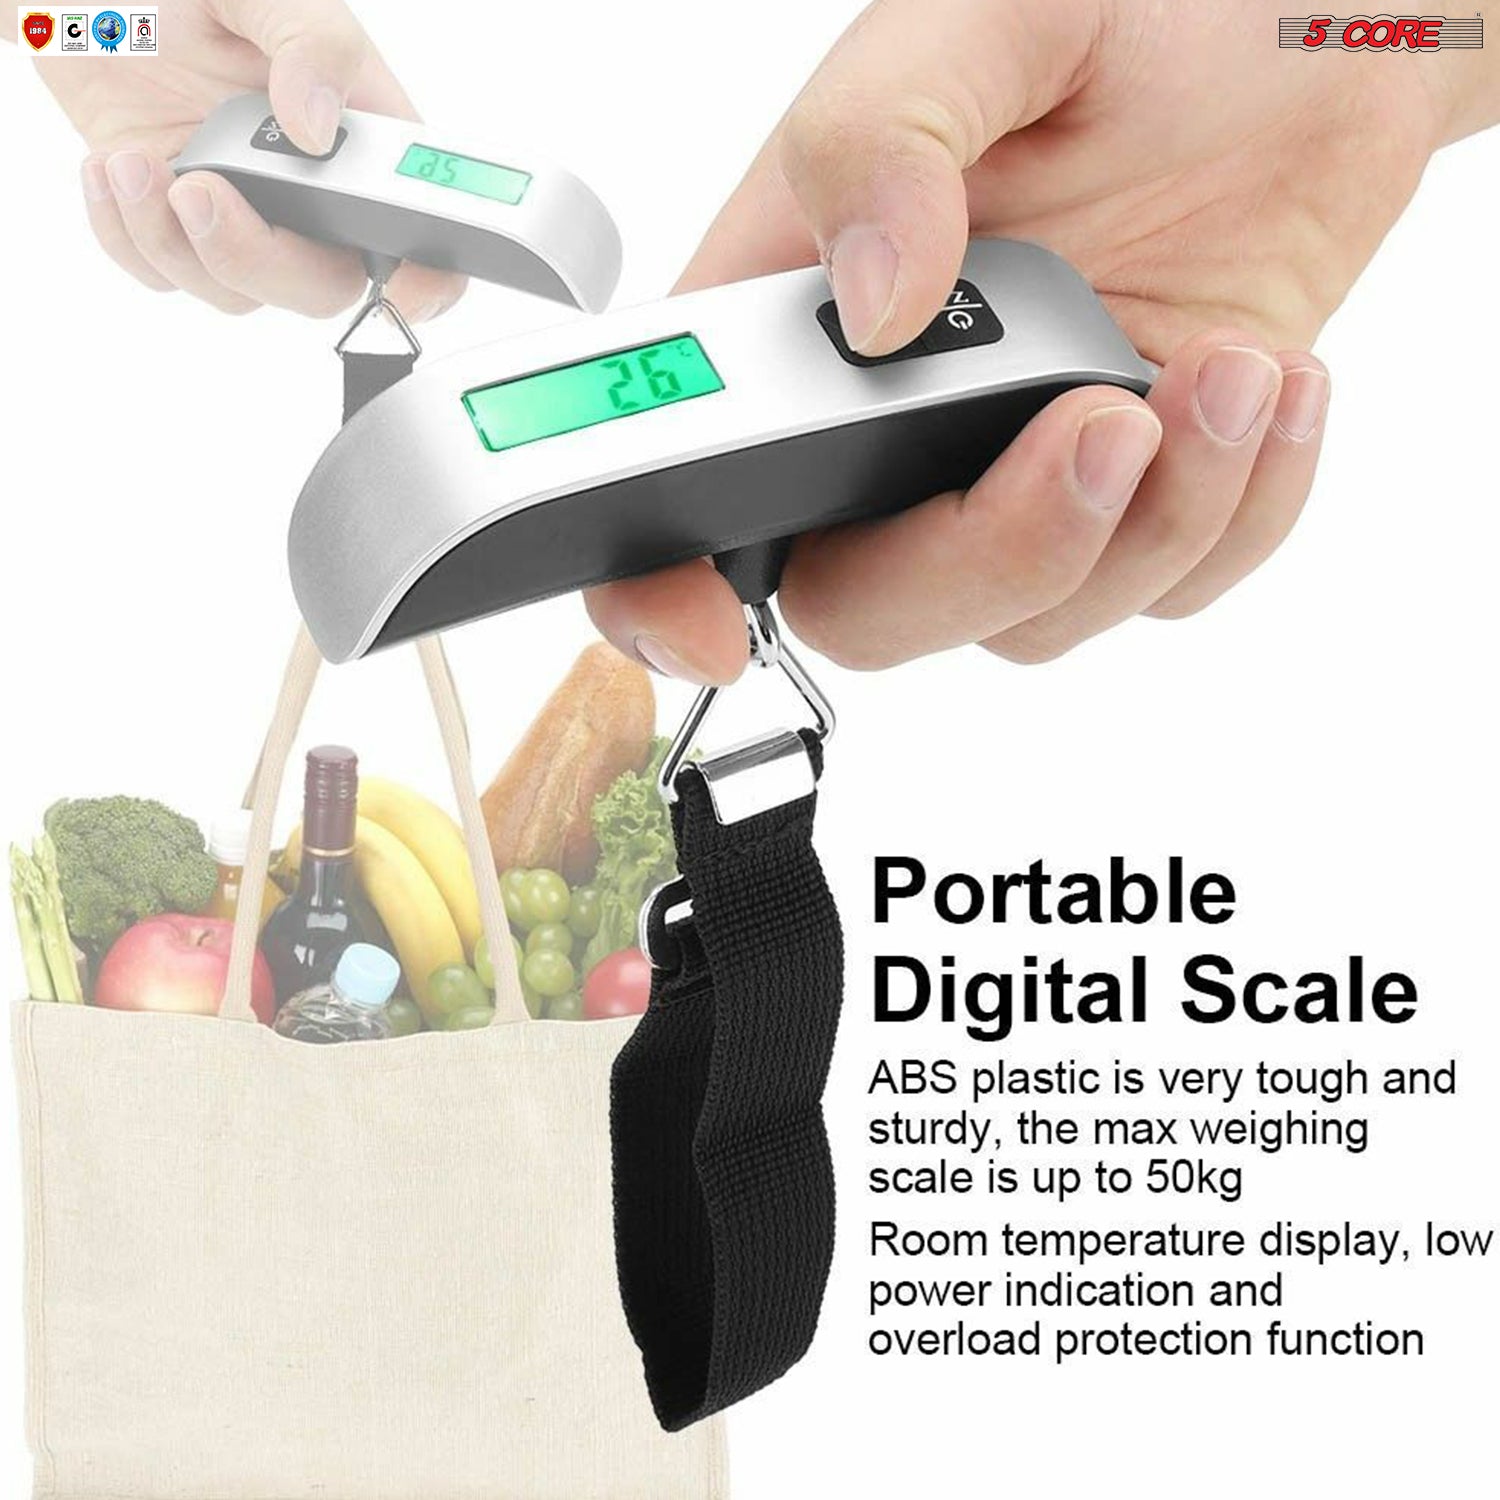 5 Core Pair Luggage Scale Handheld Portable Electronic Digital Hanging